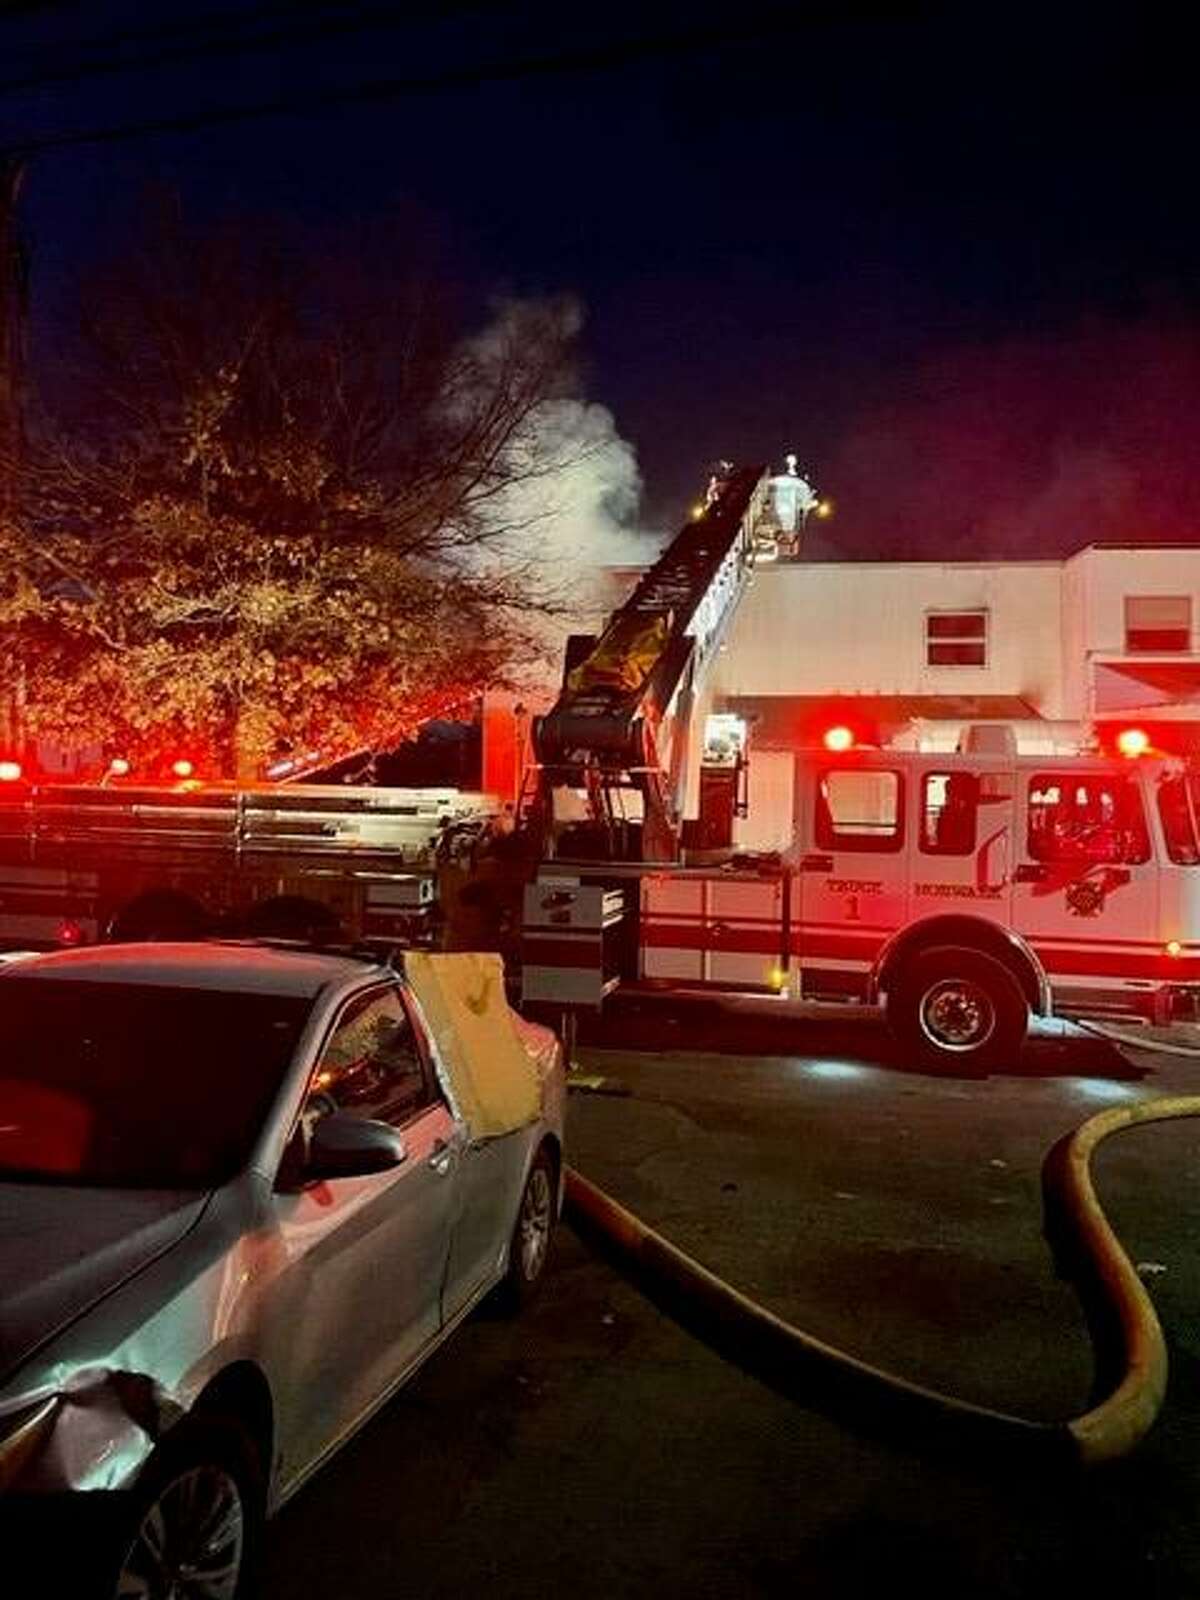 Thirty-three city firefighters responded to the blaze at 7 Reynolds St. in Norwalk, Conn., around 6 a.m. Wednesday, Jan. 19, 2022.